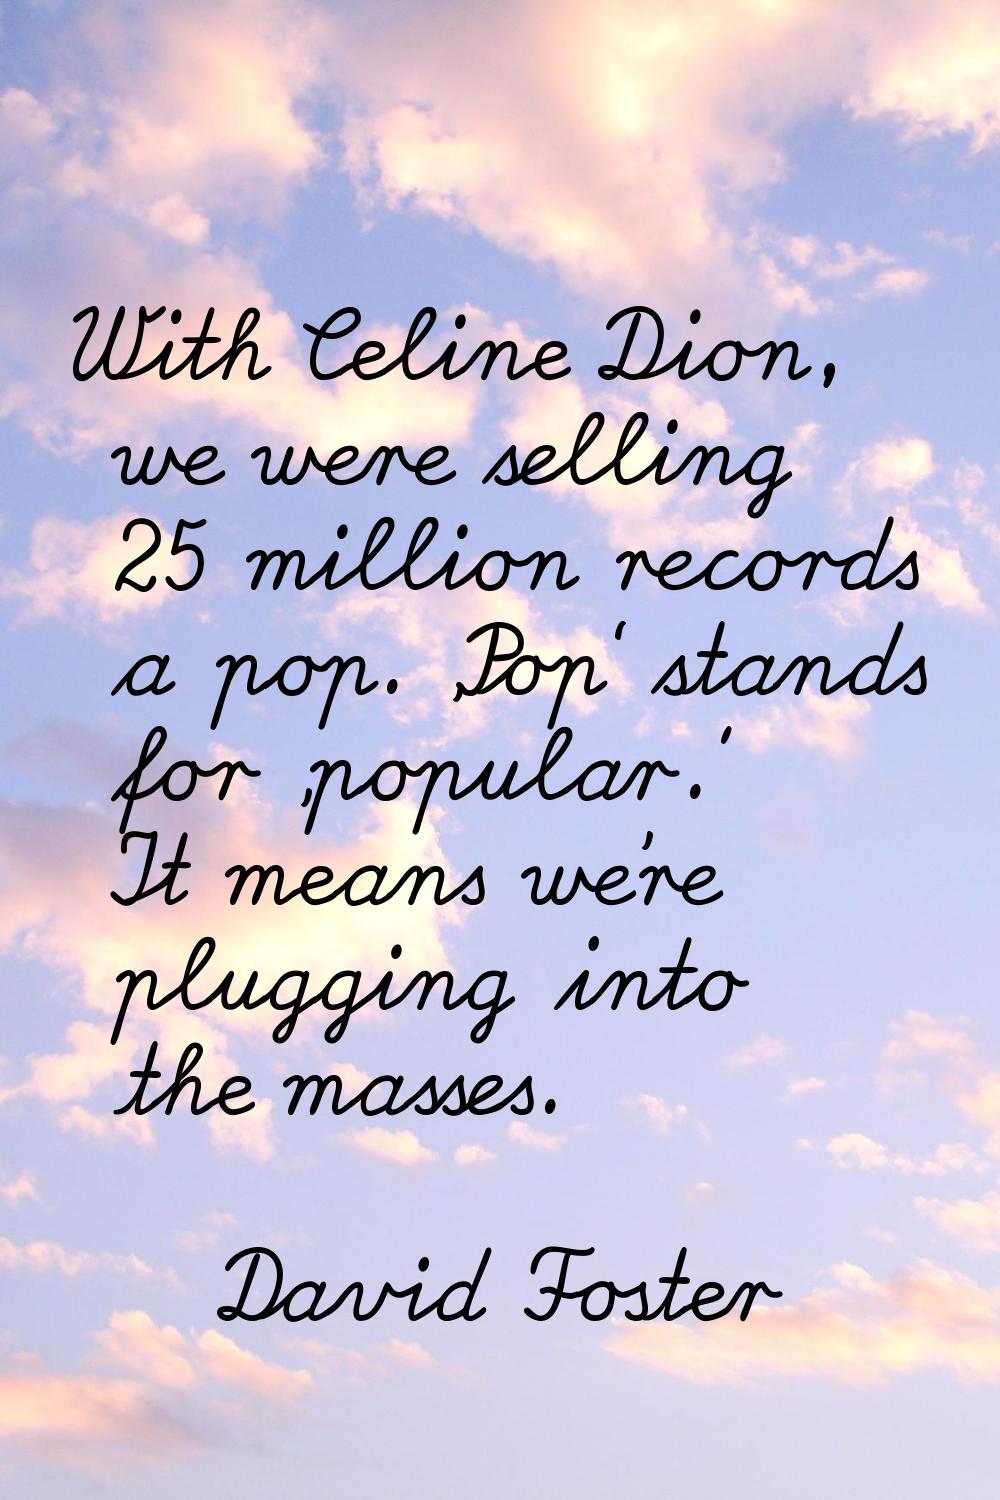 With Celine Dion, we were selling 25 million records a pop. 'Pop' stands for 'popular.' It means we